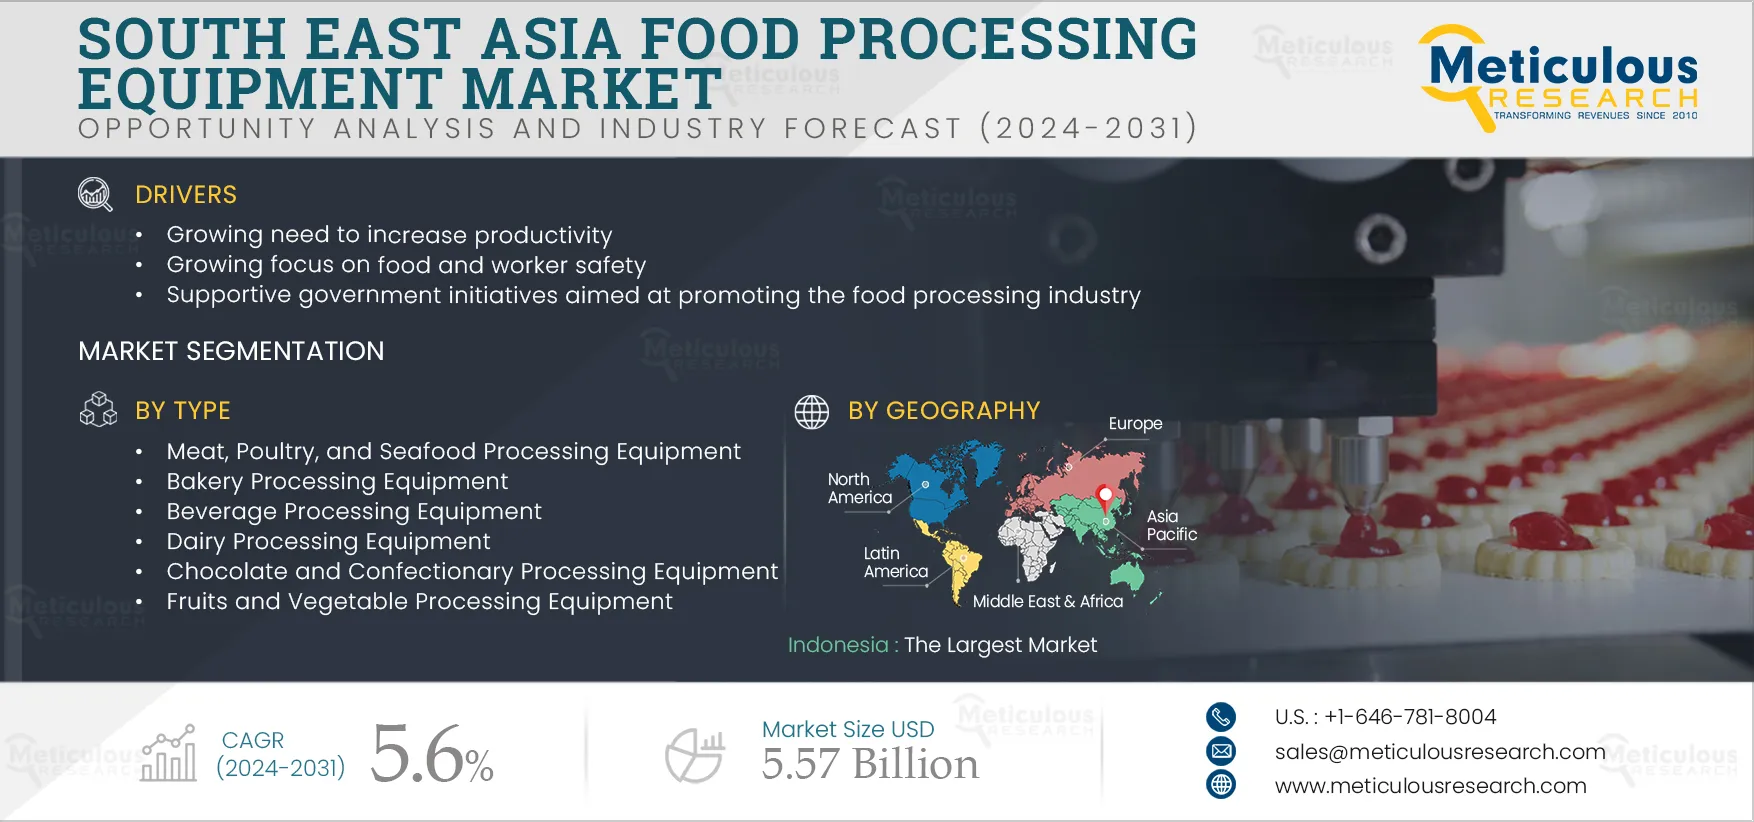 South East Asia Food Processing Equipment Market